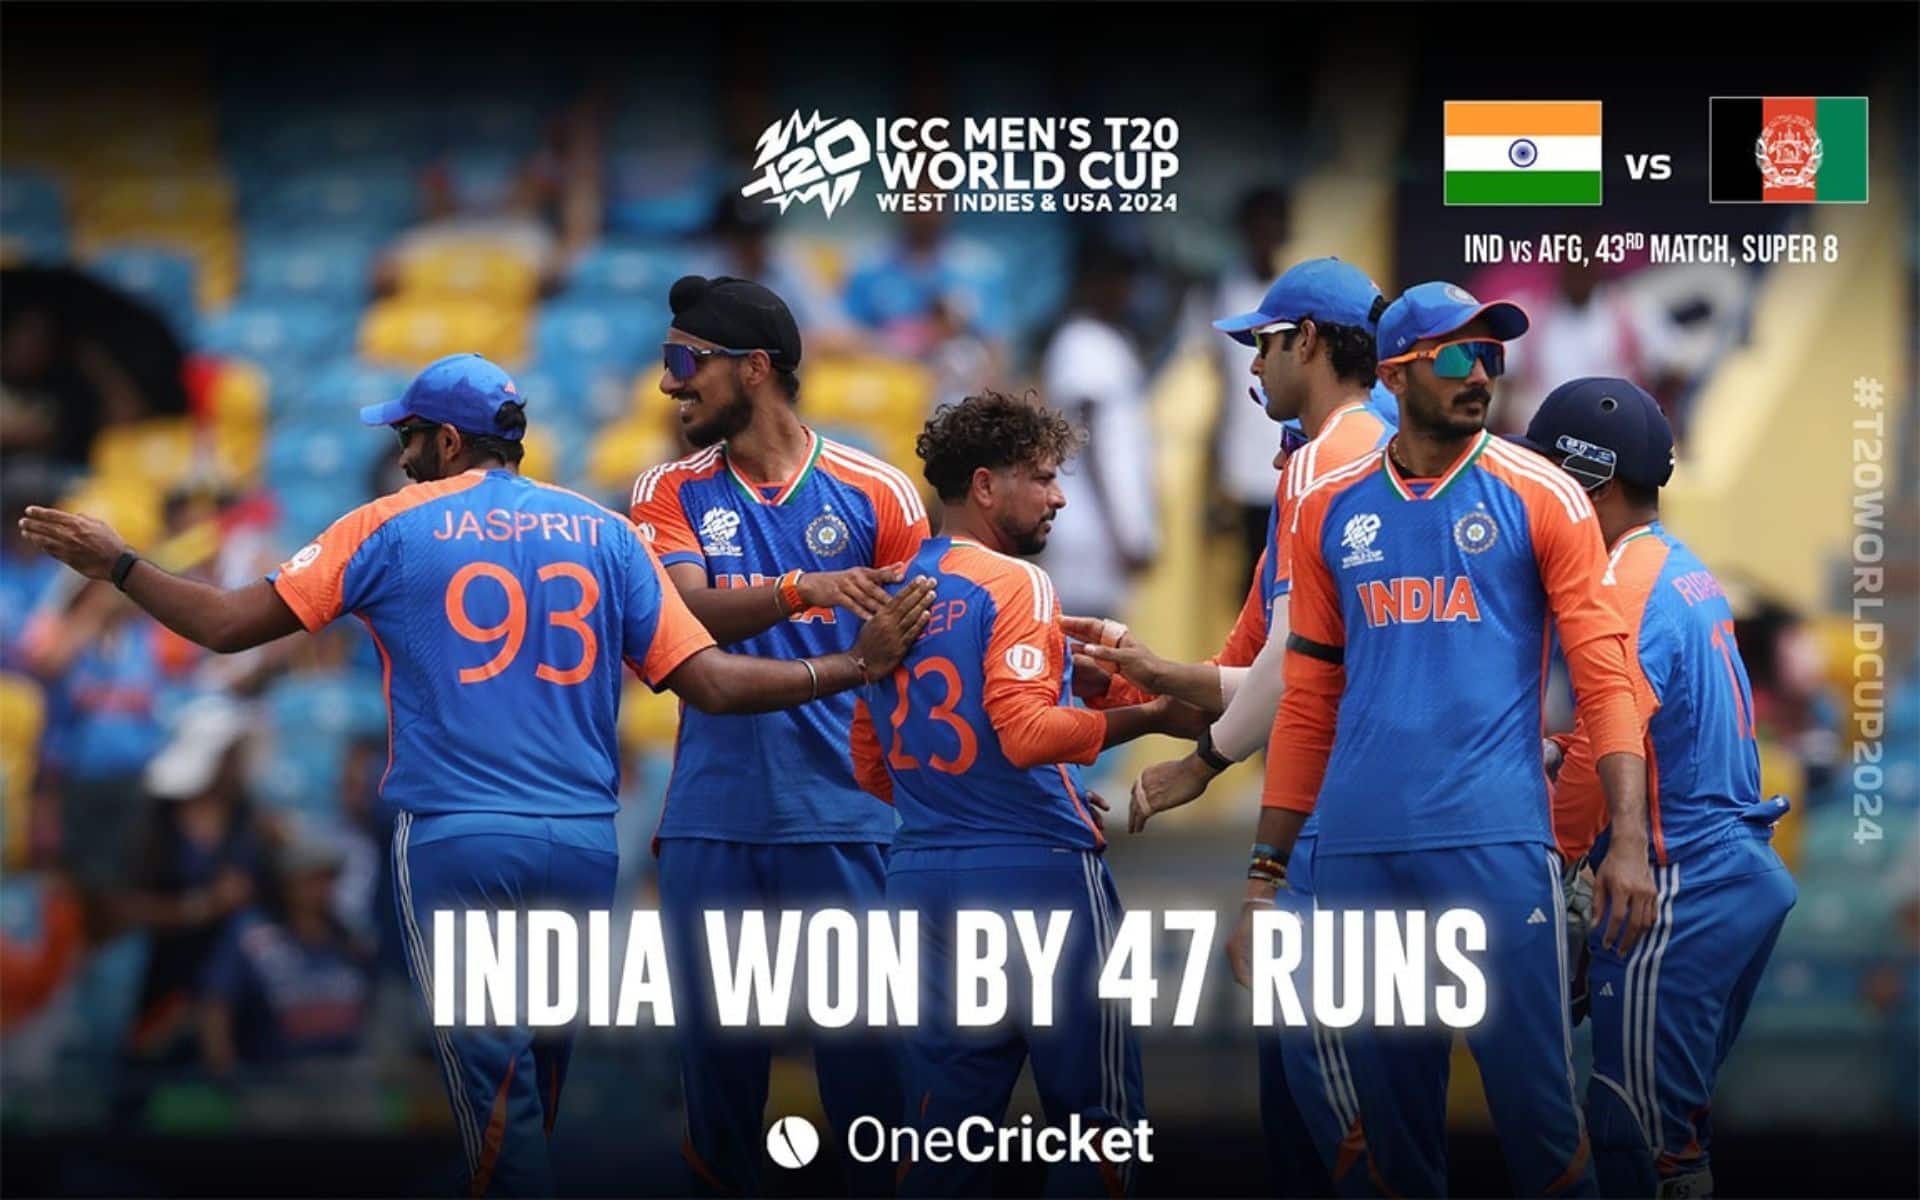 India registered a thumping win vs AFG (X.com)